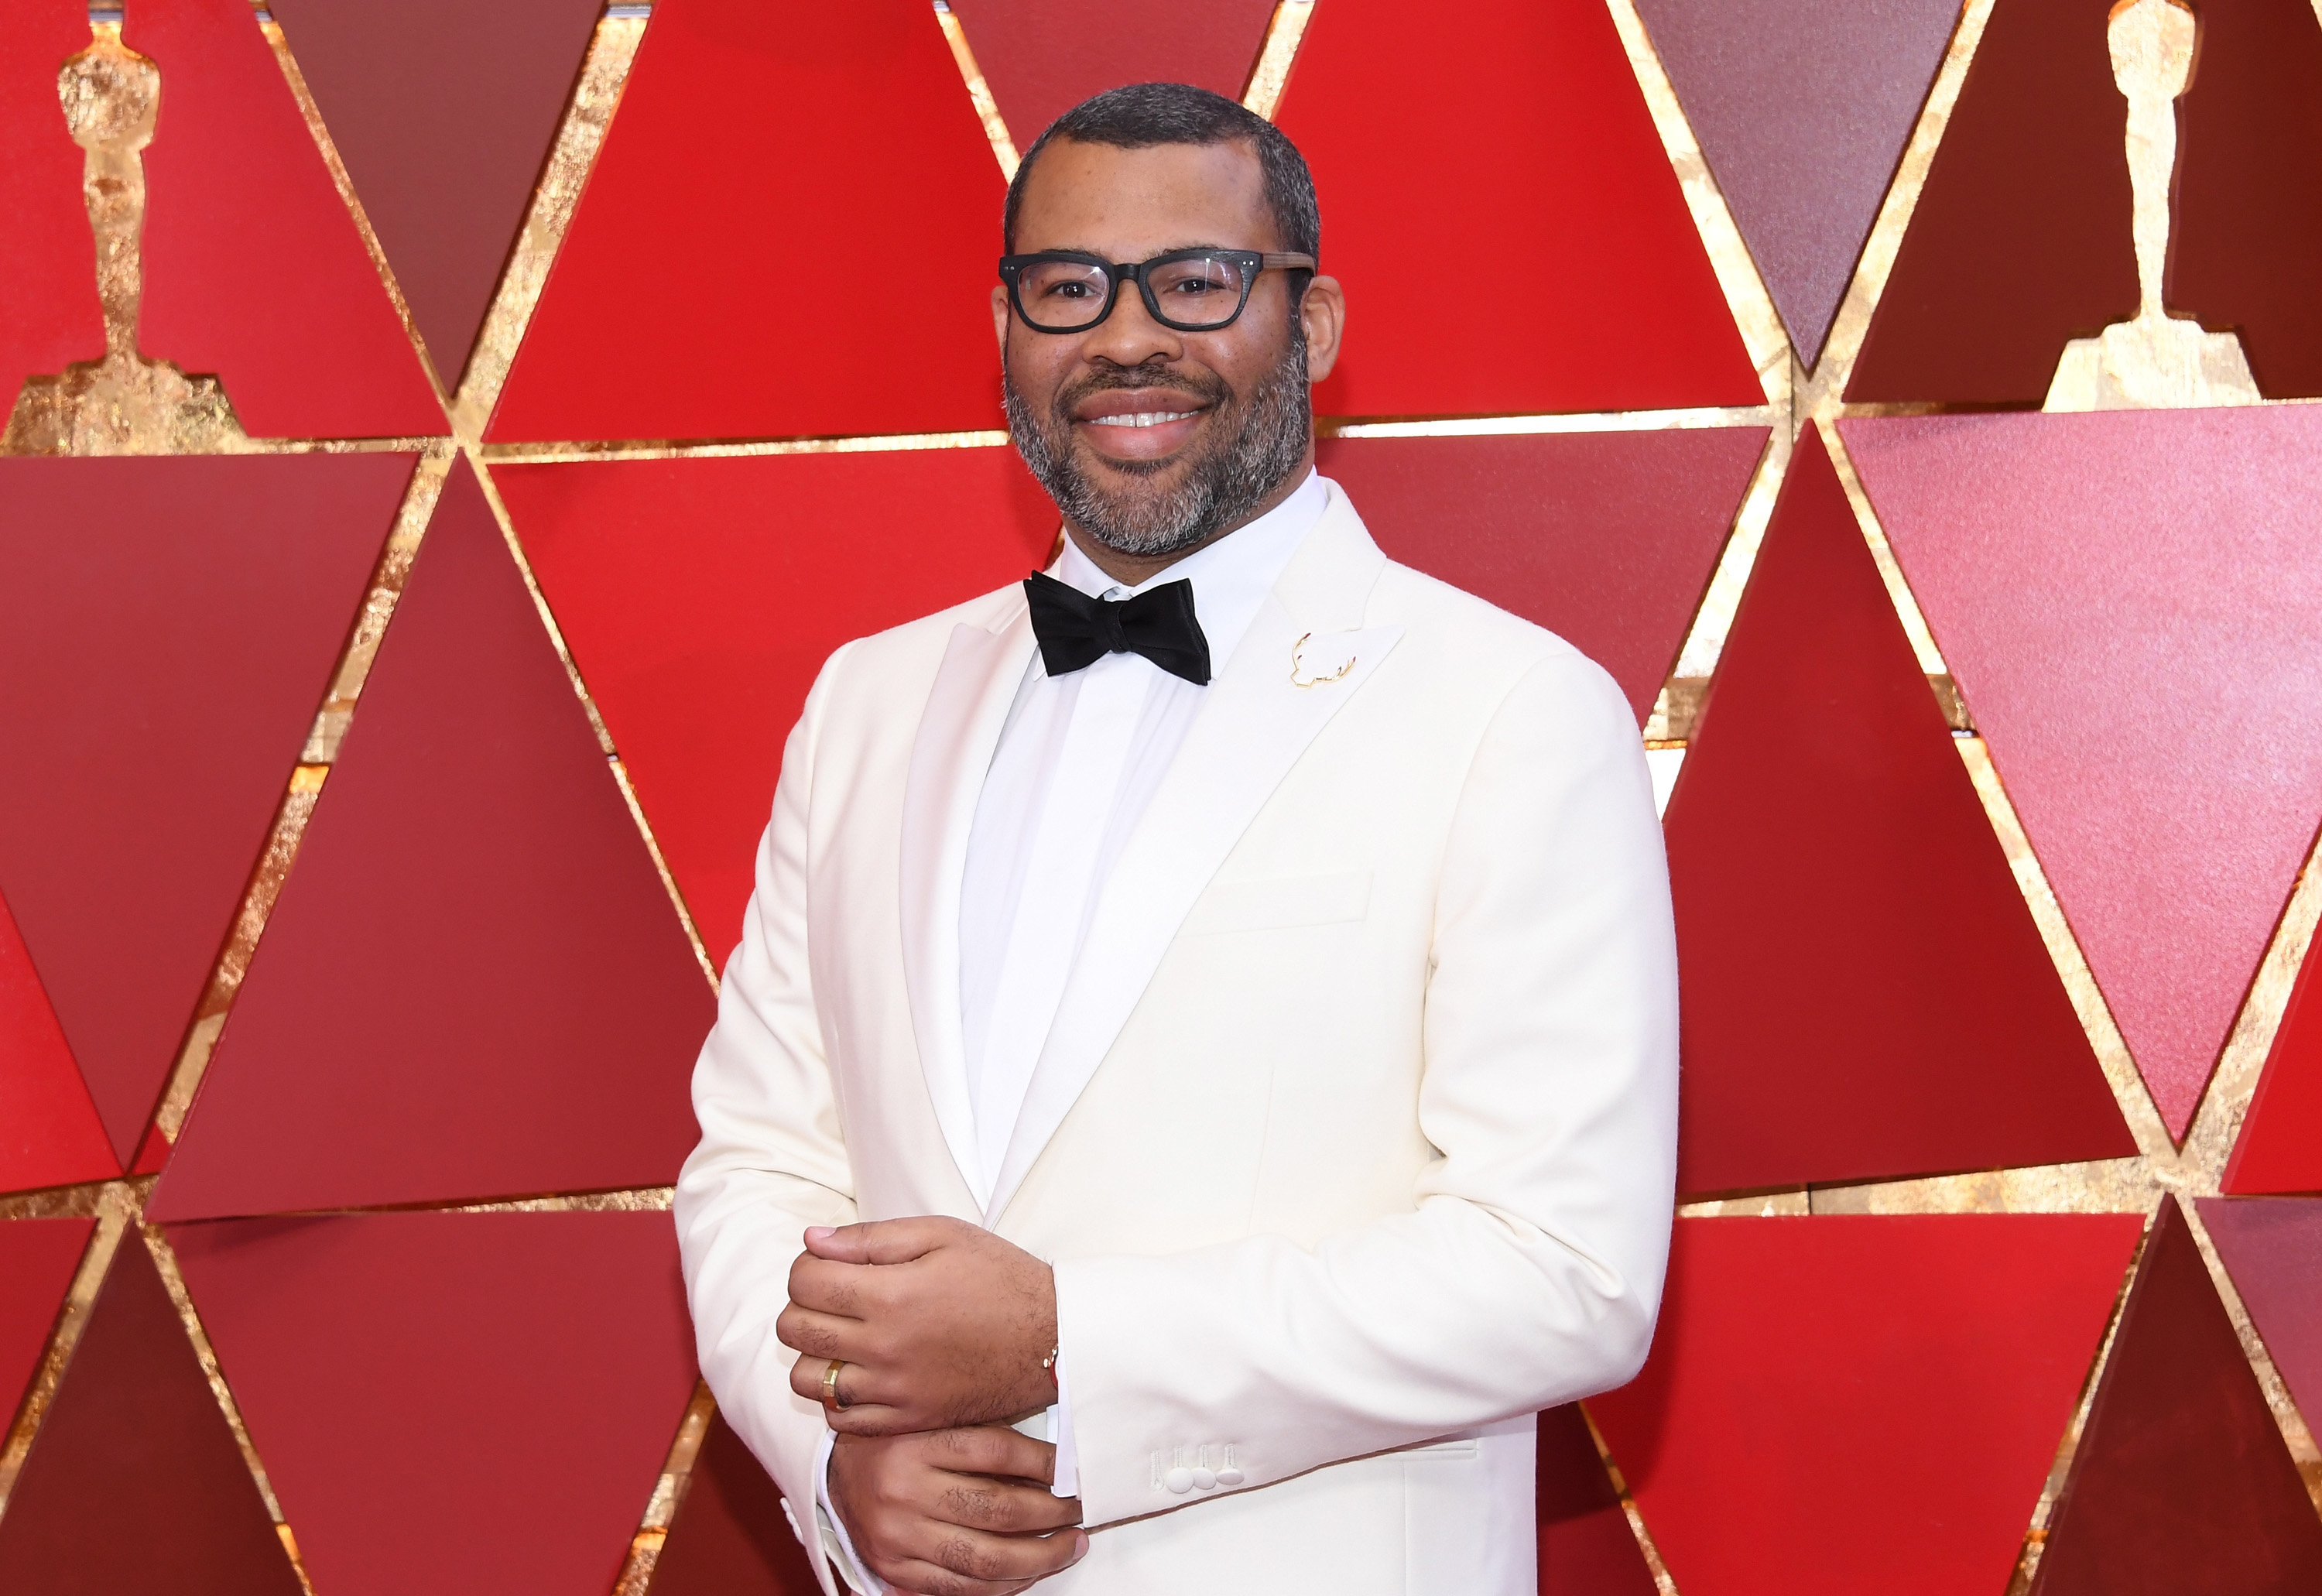 Jordan Peele attends the 90th Annual Academy Awards on March 4, 2018 in Hollywood, California. Peele will host a new version of 'The Twilight Zone.' (Photo by Kevork Djansezian/Getty Images)